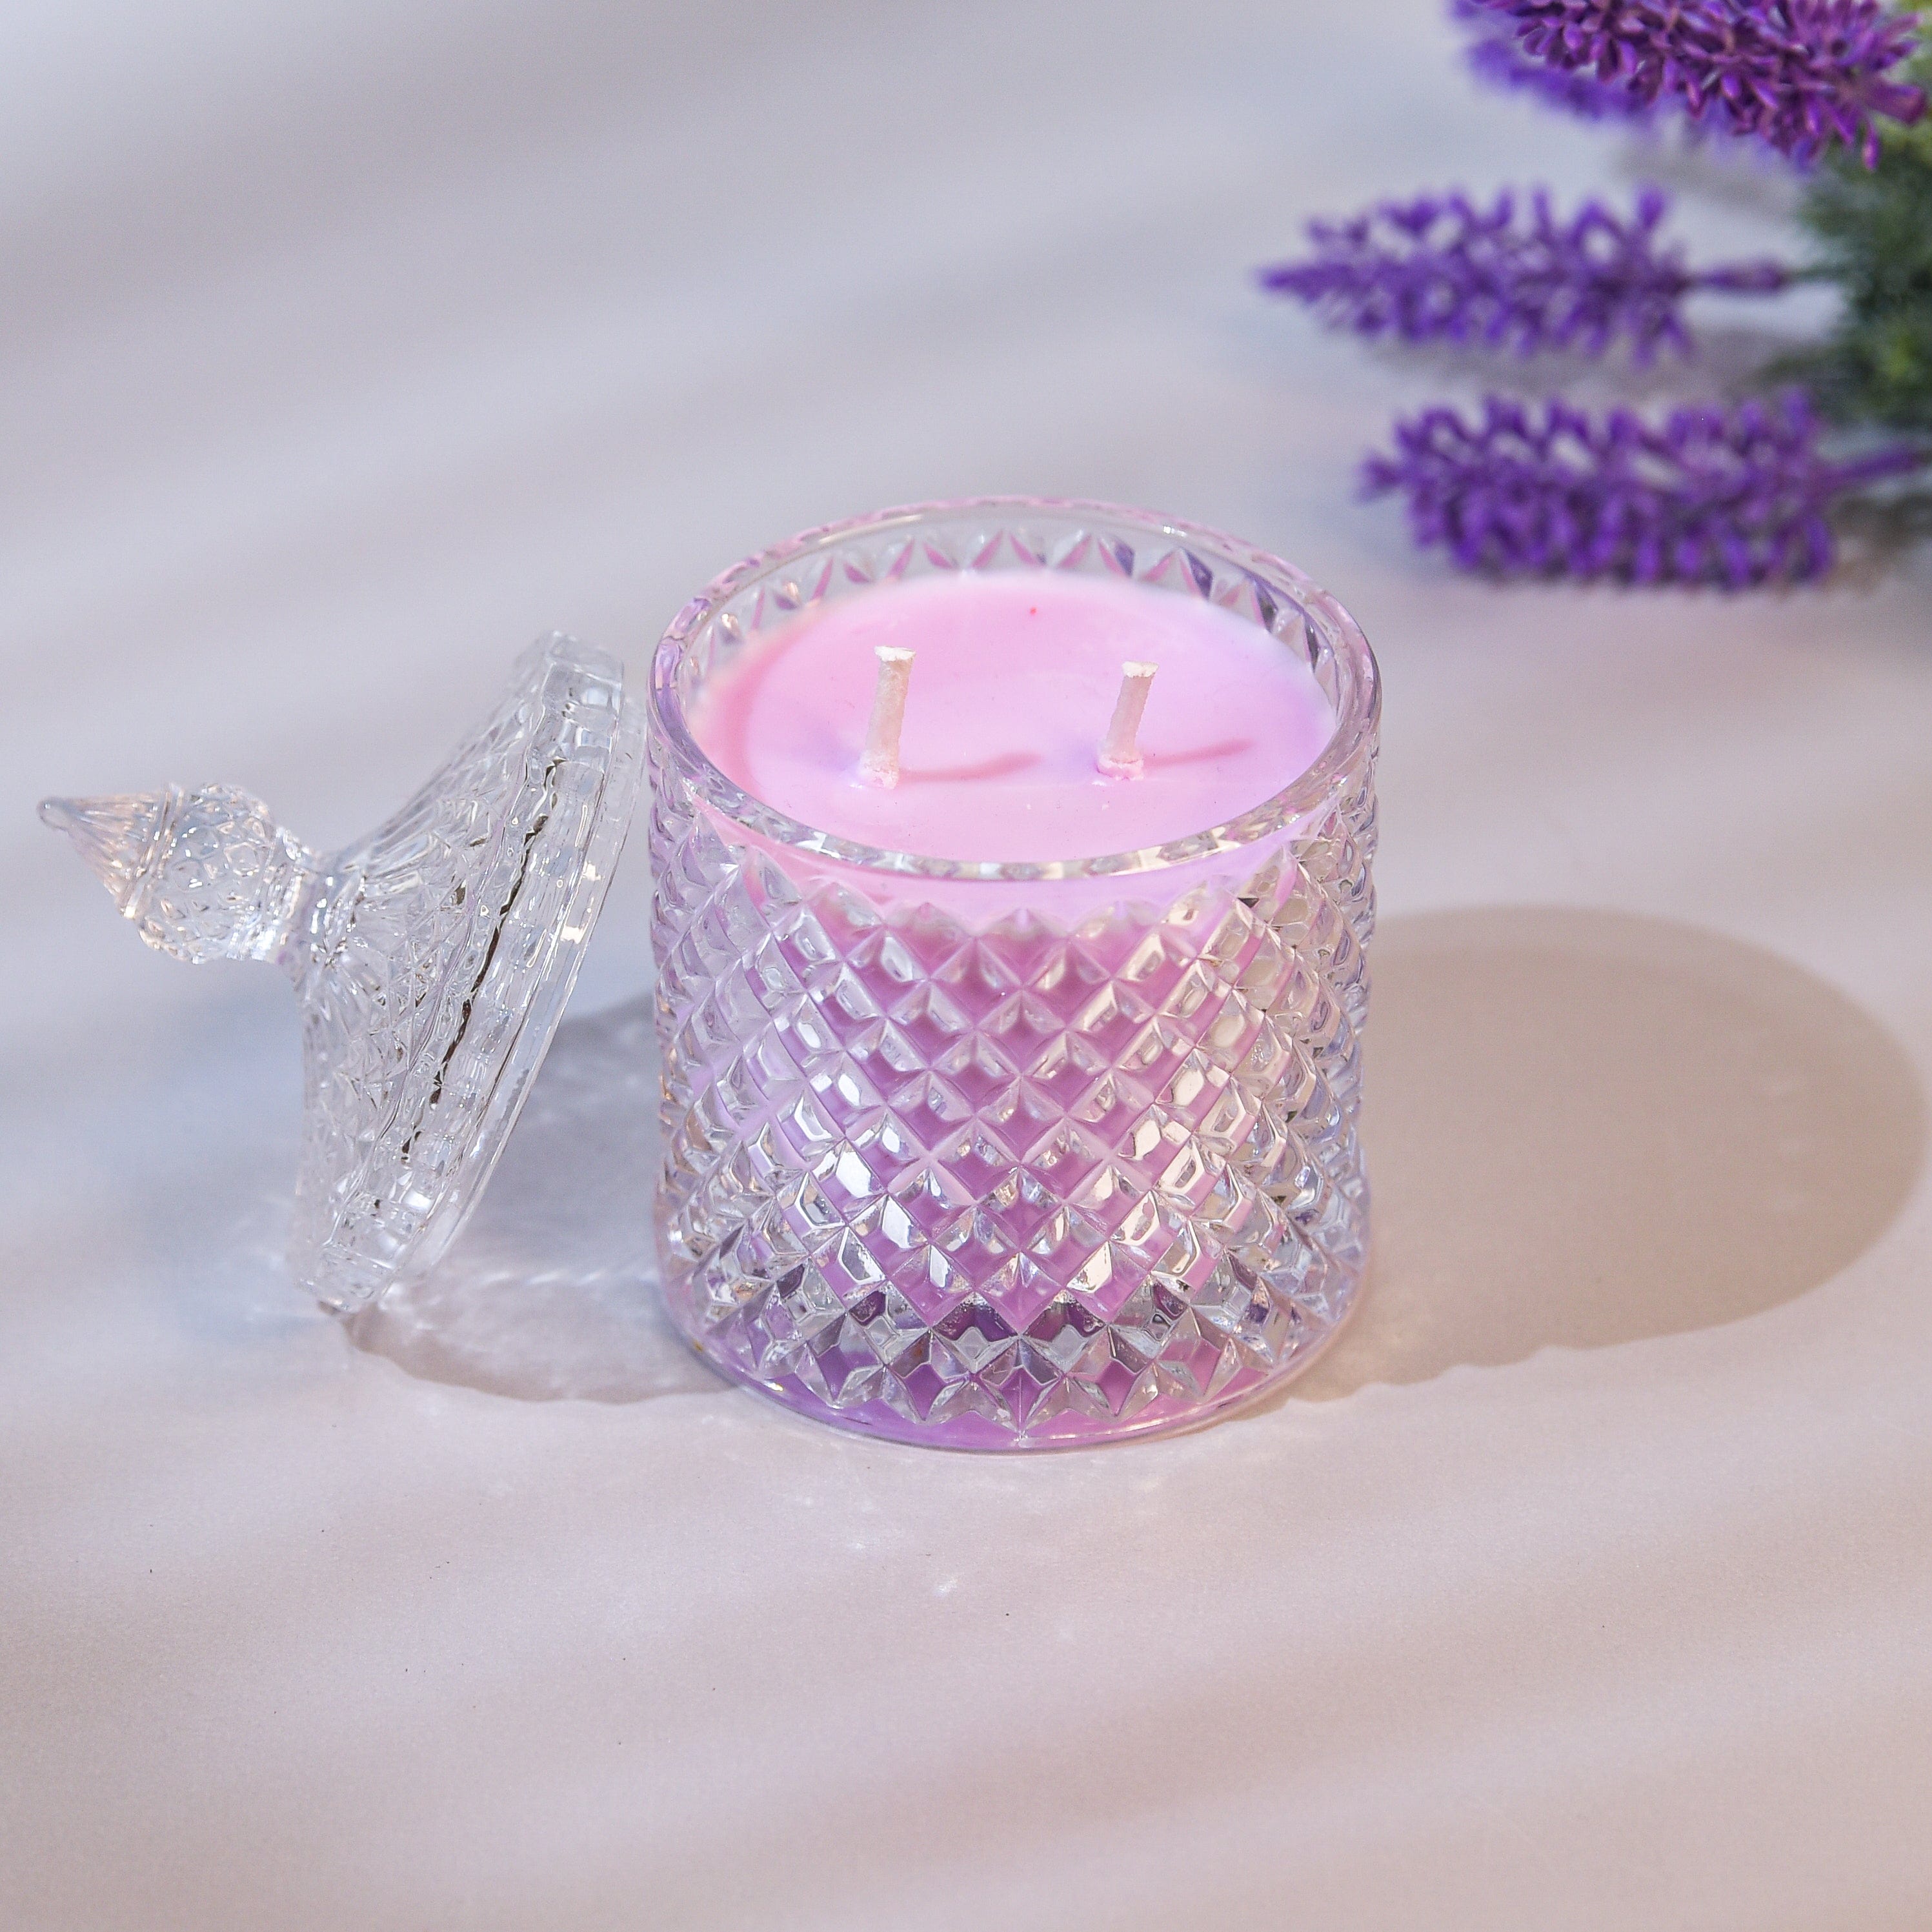 Illuminate- Whipped Shea Butter Scented 2 wick candle jar